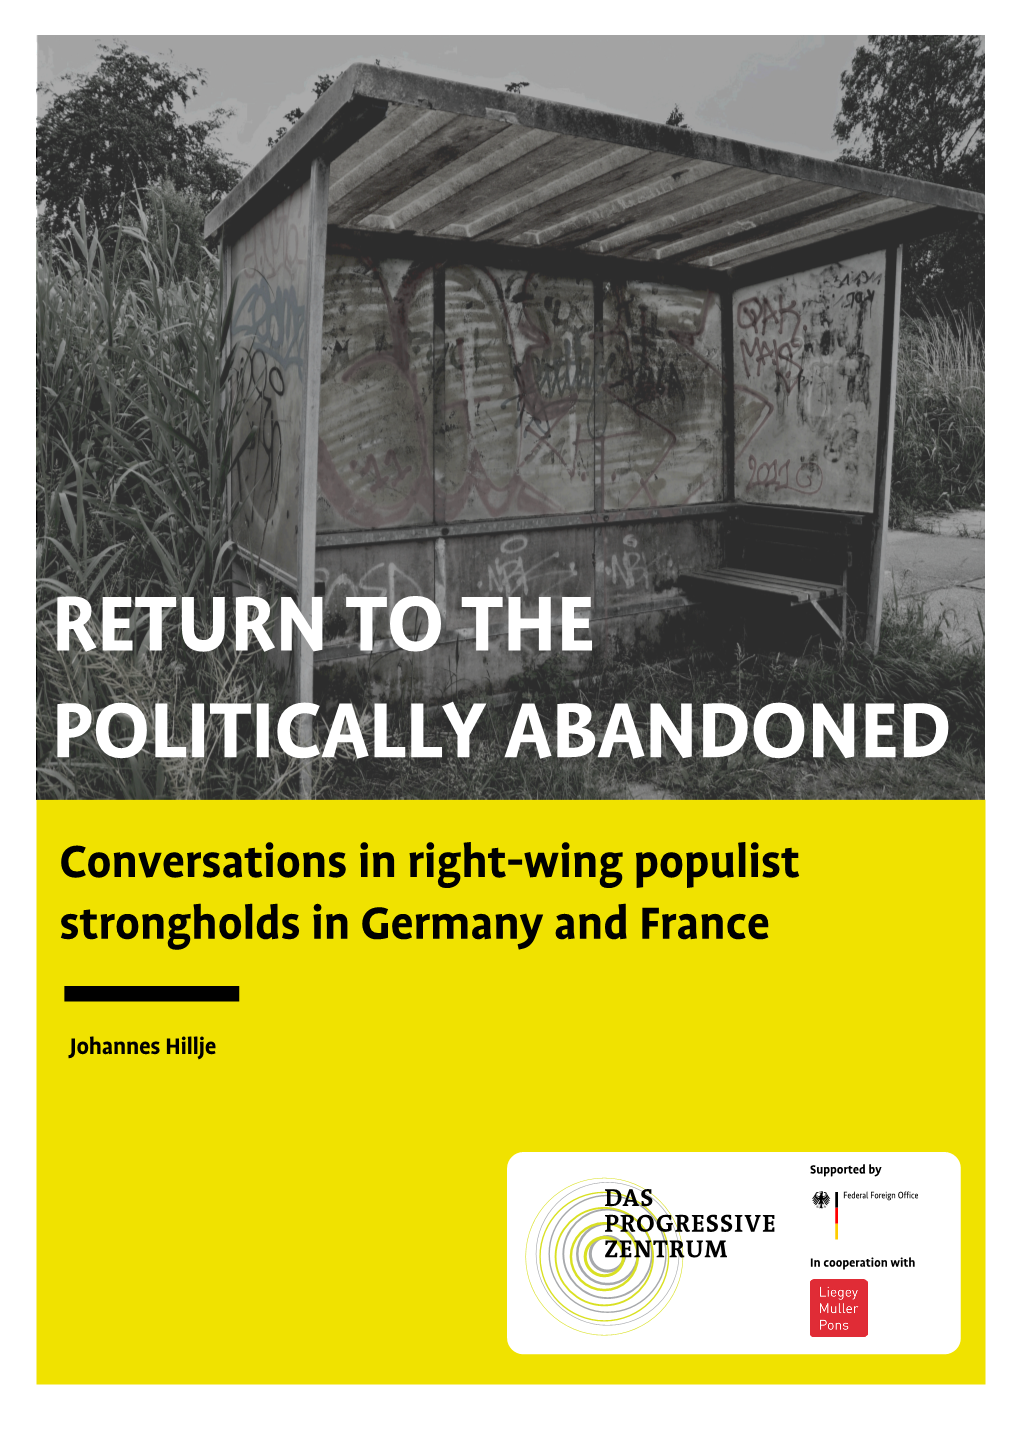 Return to the Politically Abandoned-Conversations in Right-Wing Populist Strongholds in Germany and France Das Progressive